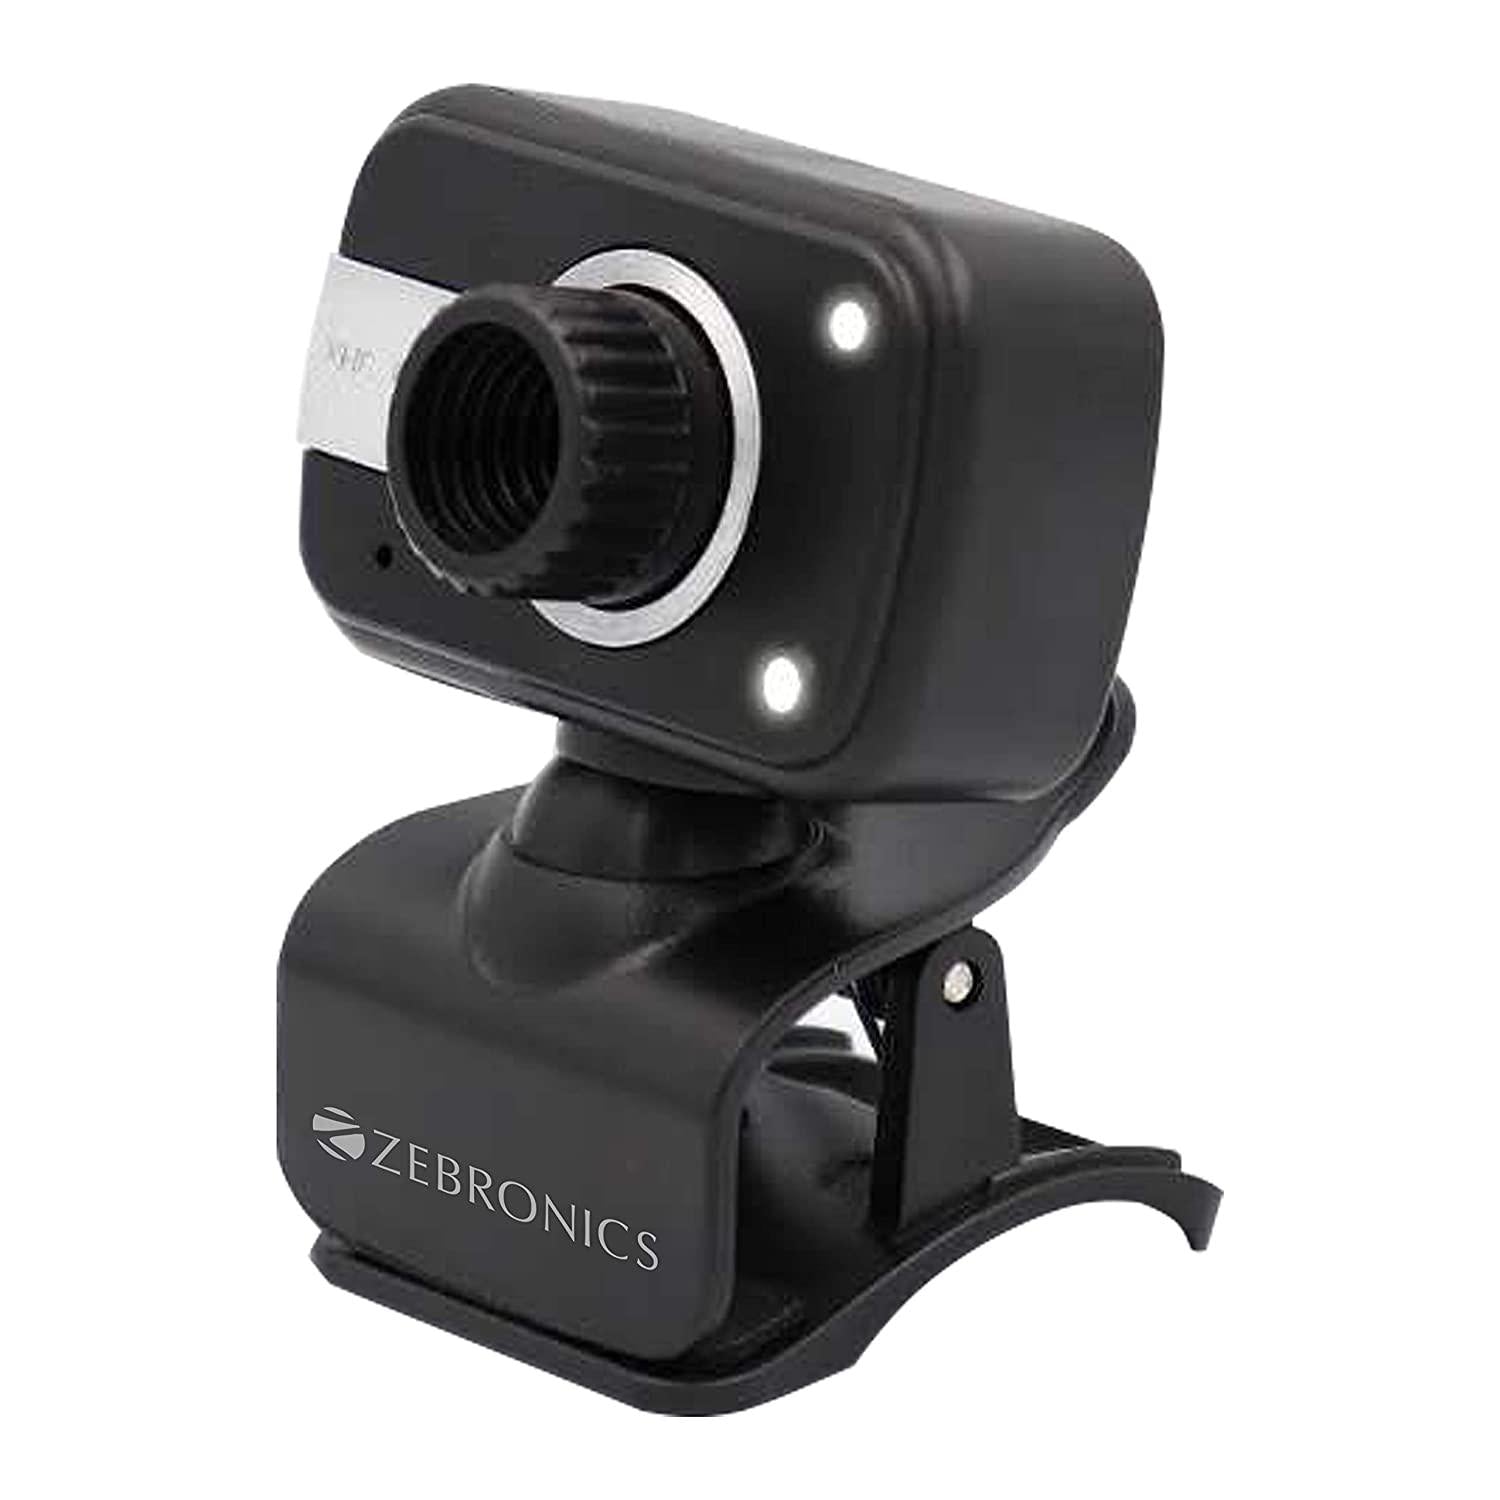 Zebronics Zeb-Crisp Pro Web Camera (HD) with 5P Lens,Built-in Microphone,Auto White Vision,Night Vision and Manual Switch for LED (Black) - onBeli